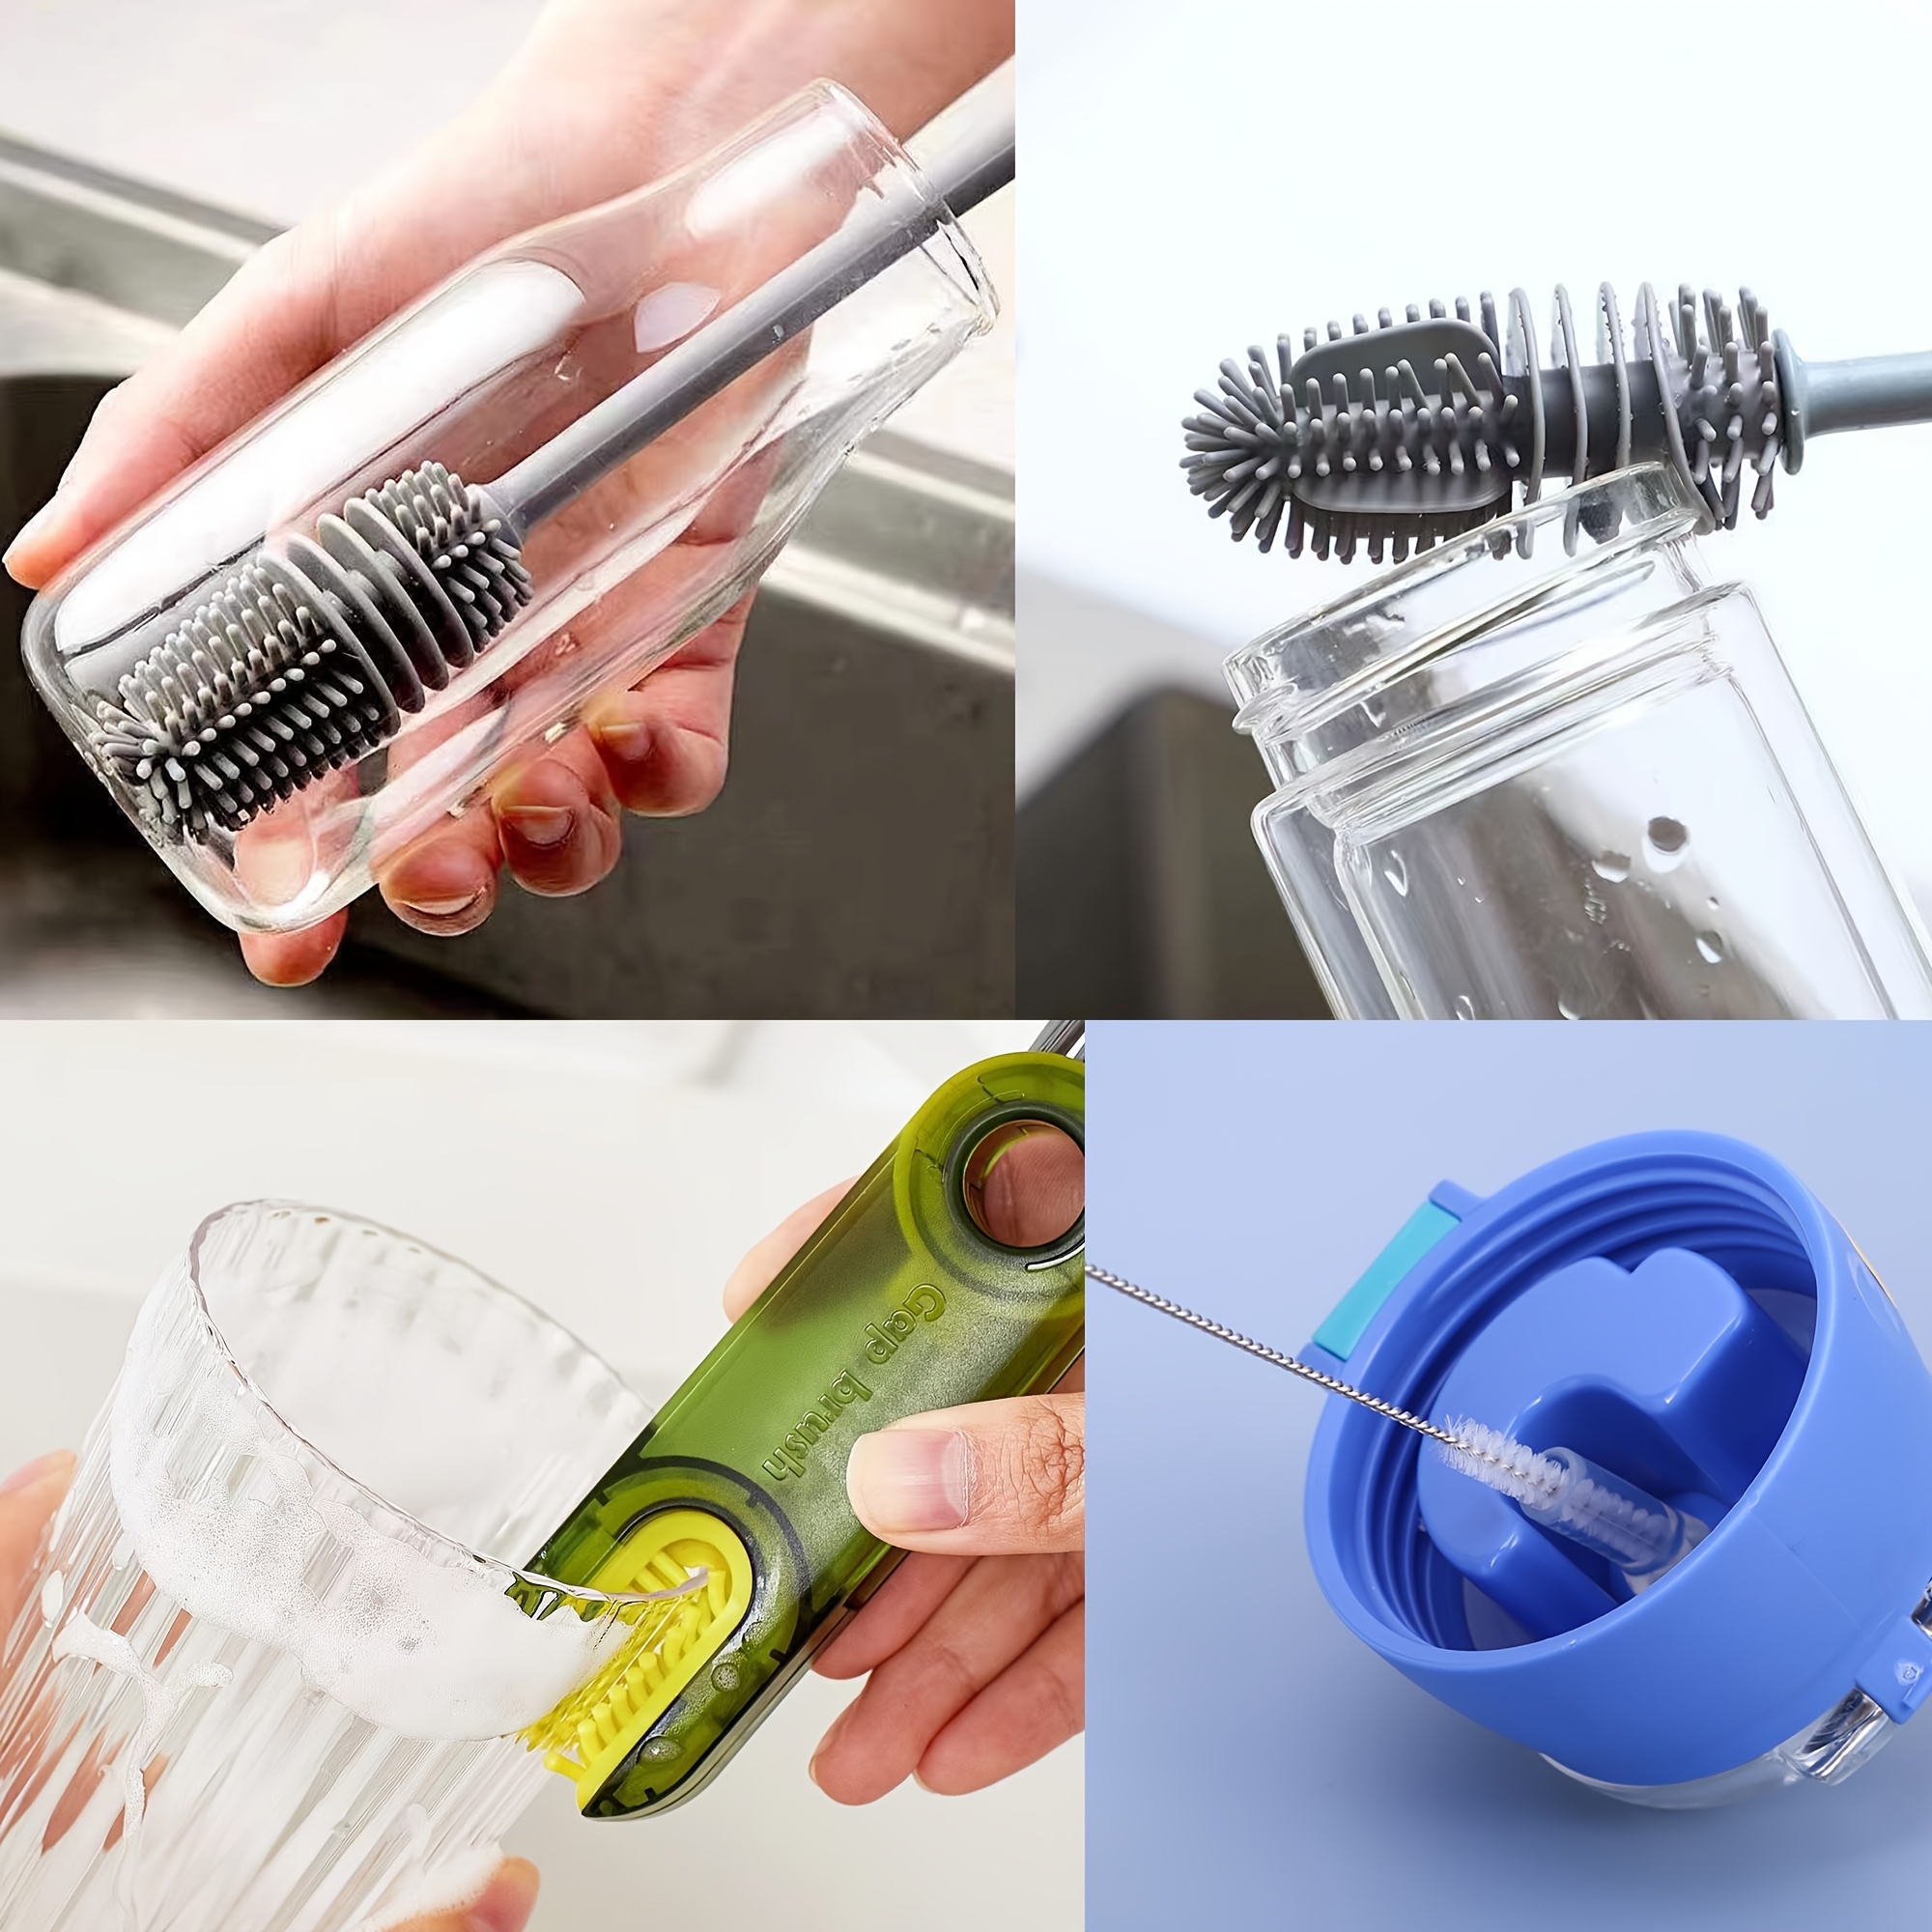 2pcs Drinking Straw Cleaning Brush - Stainless Steel Brush Cleaner For  Glass, Silicone, Metal Straw And More, Includes Nylon Brush For Mini Bottle  And Test Tube